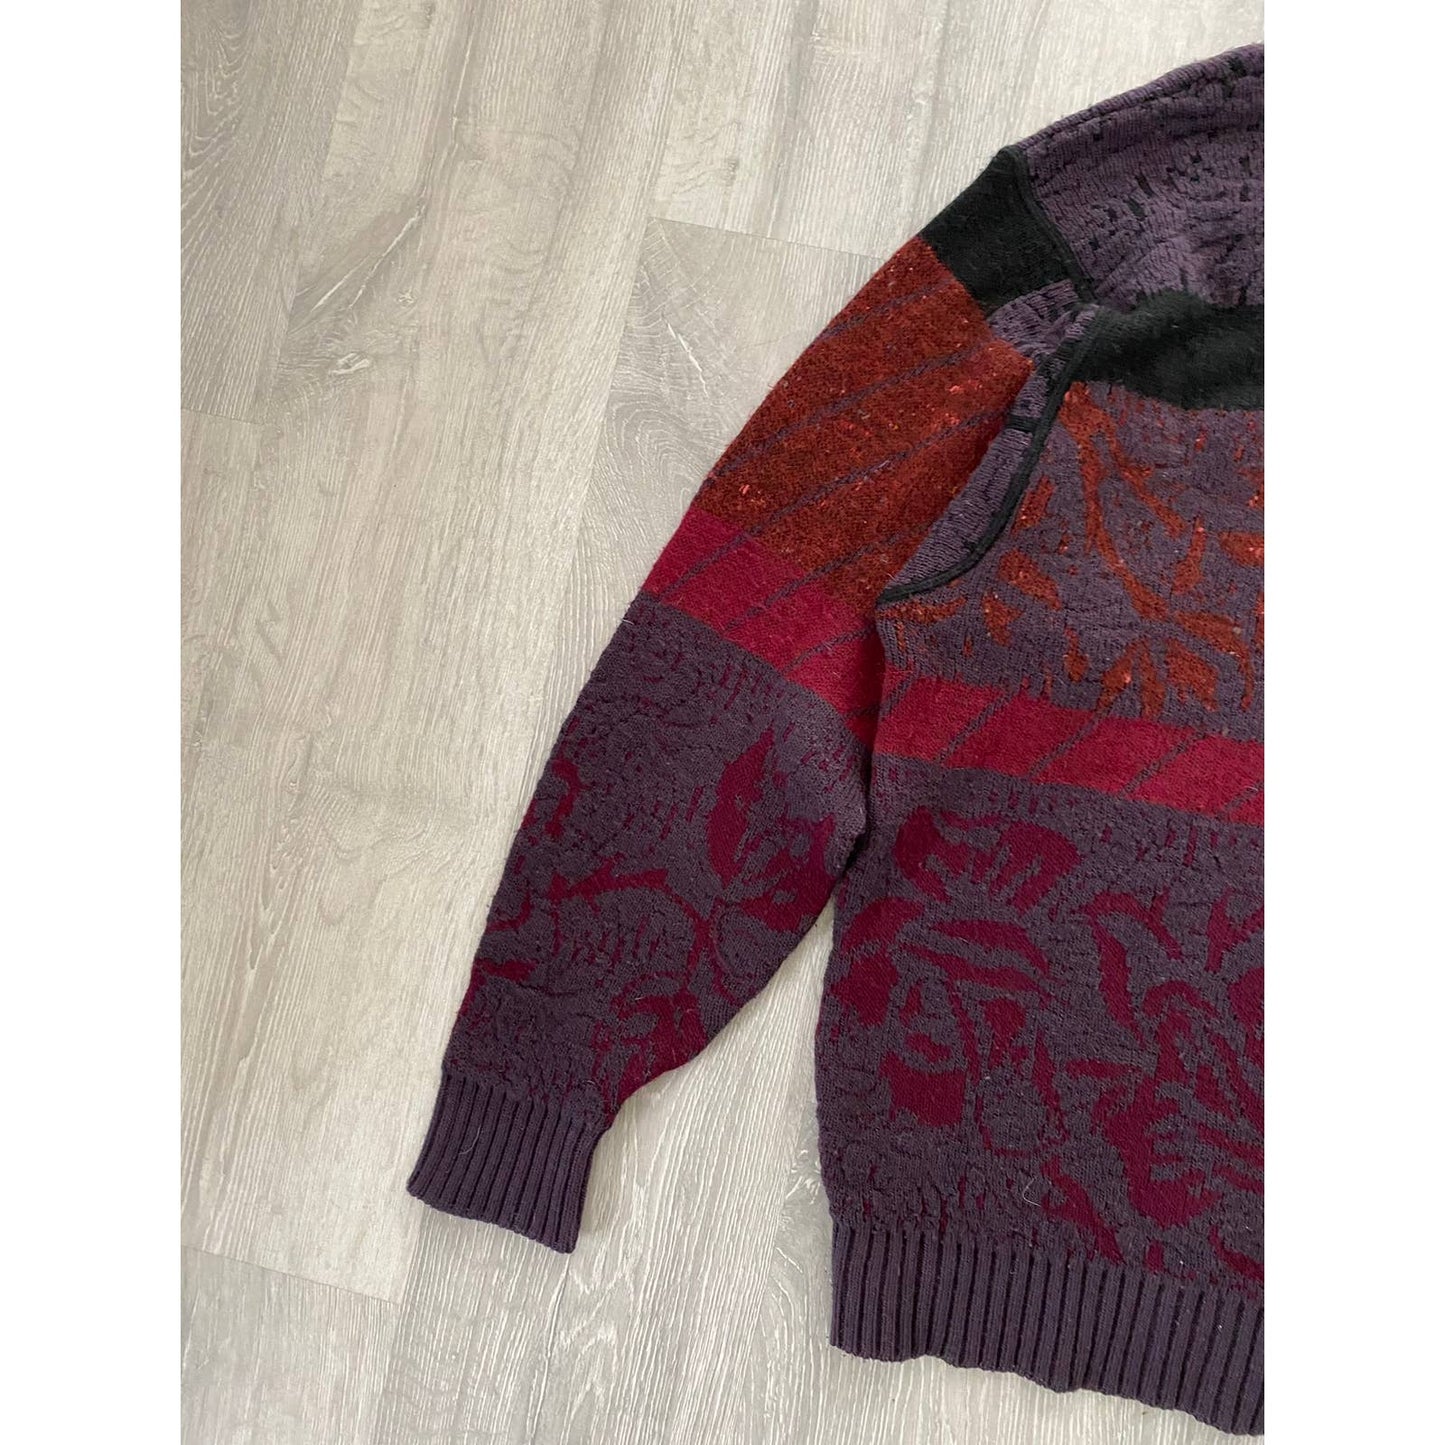 Carlo Colucci vintage sweater knitwear floral Purple red